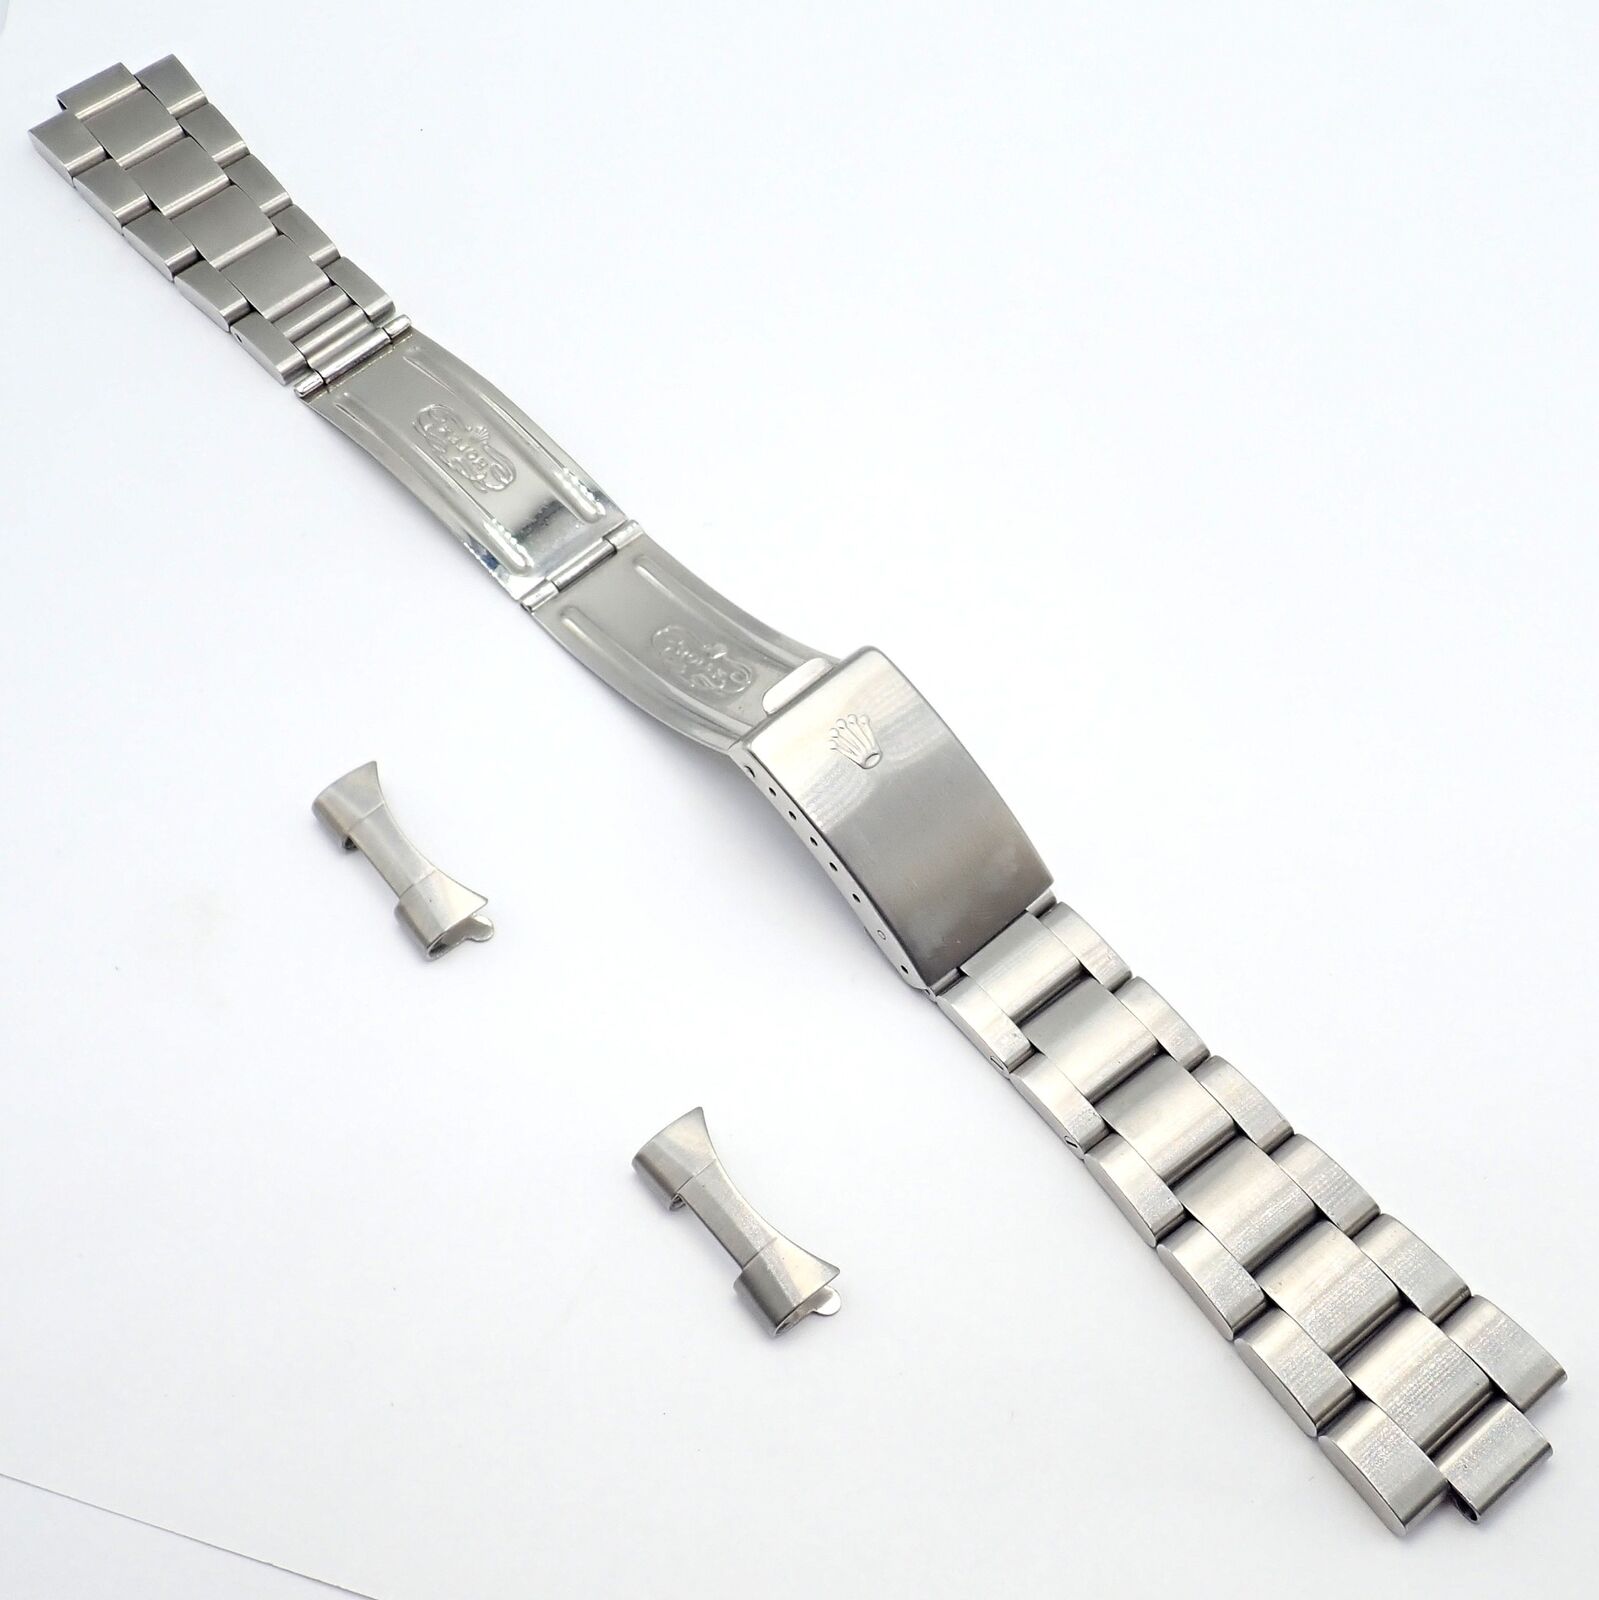 Rolex Jewelry & Watches:Watches, Parts & Accessories:Parts, Tools & Guides:Parts:Other Watch Parts Original Rolex End Links 20mm 580 Buckle Bracelet 78360 Oyster Band Set